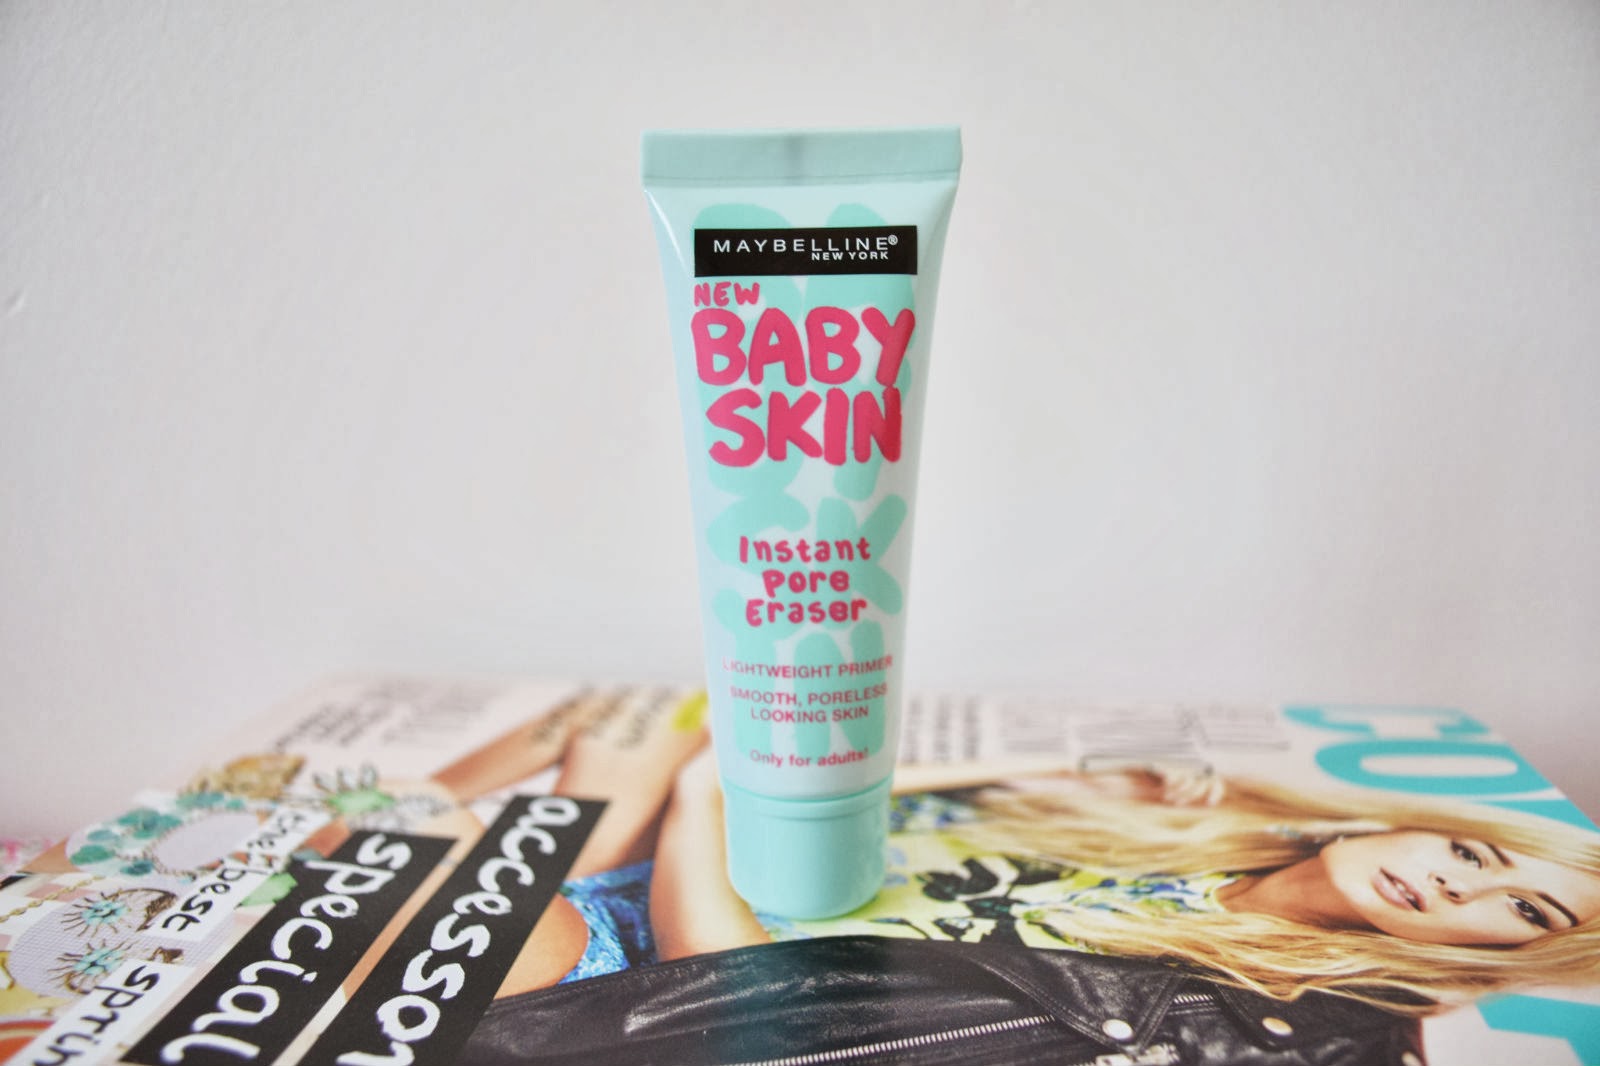 - Baby Review lucy-cole Skin Pore Instant Eraser